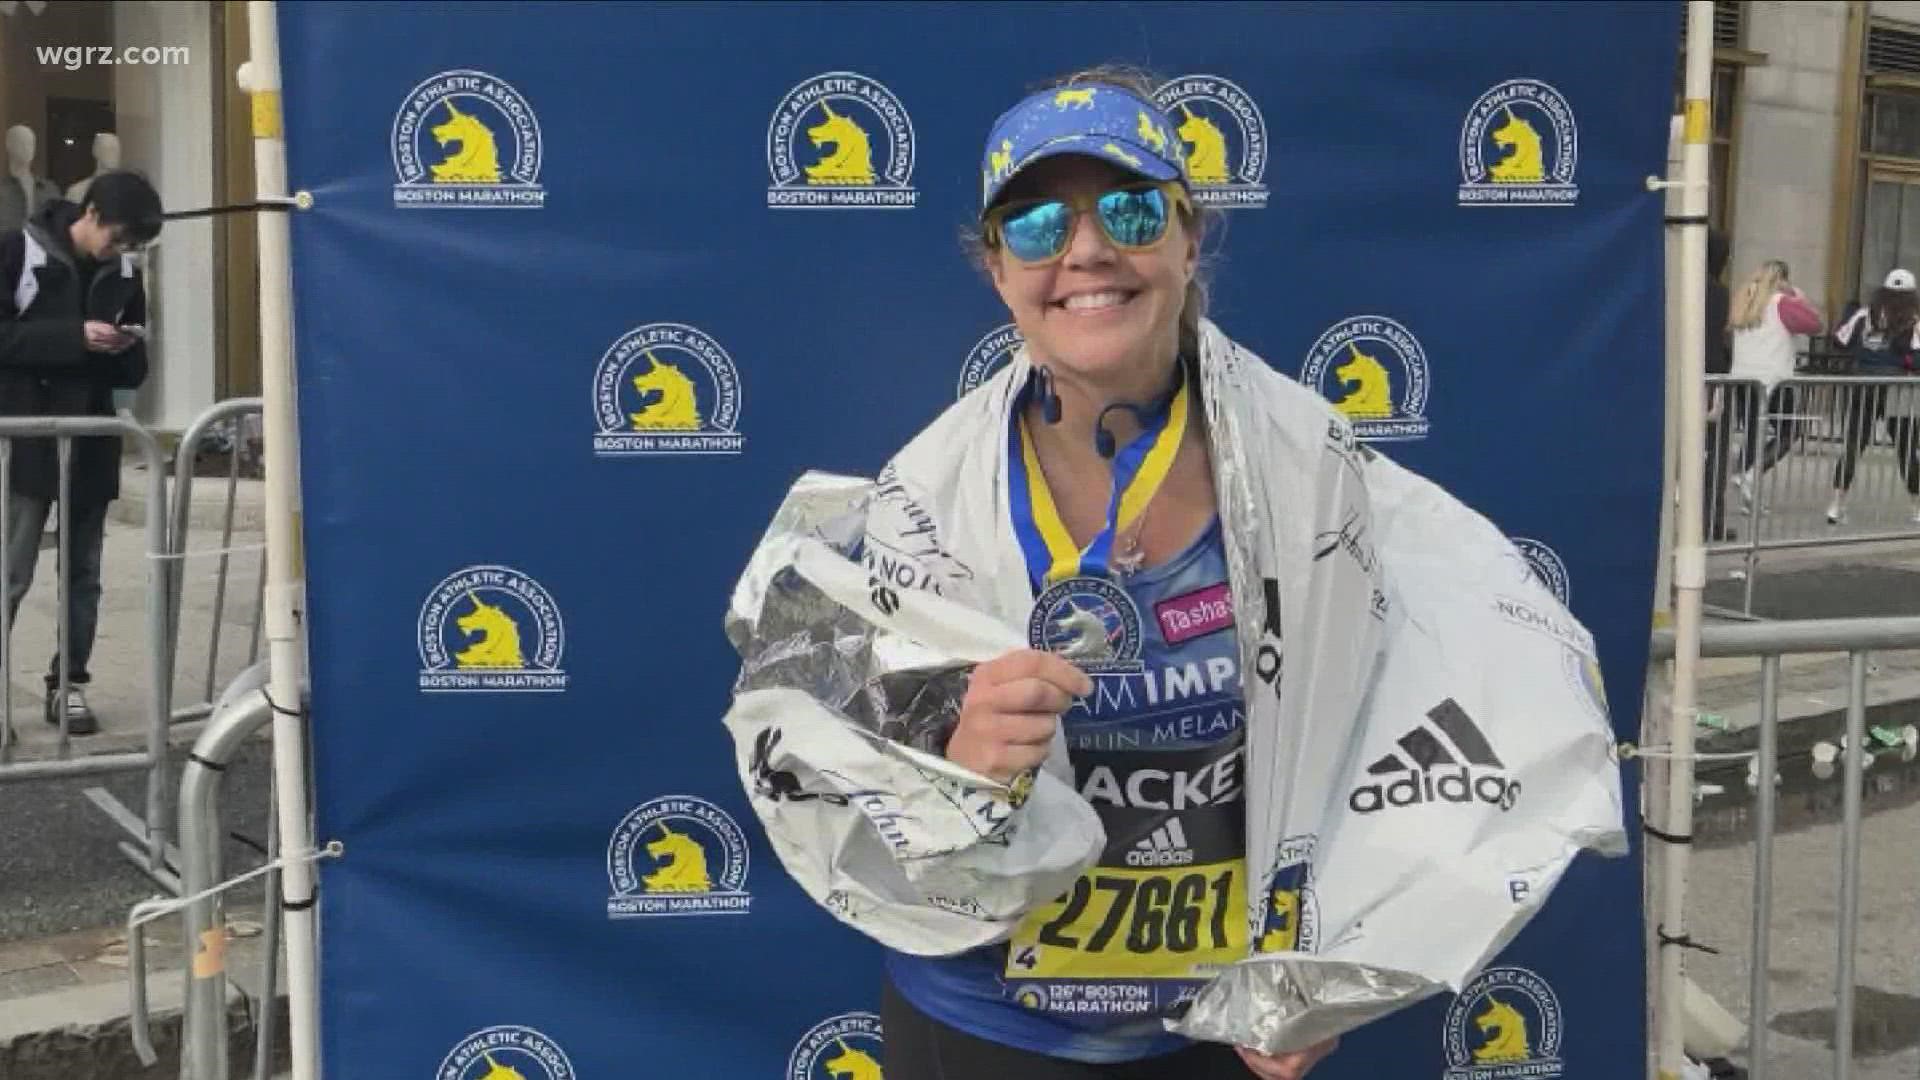 Jackey has finished the Boston Marathon in flying colors, getting it done in 5 hours and 26 minutes! We got to here form her after the race.